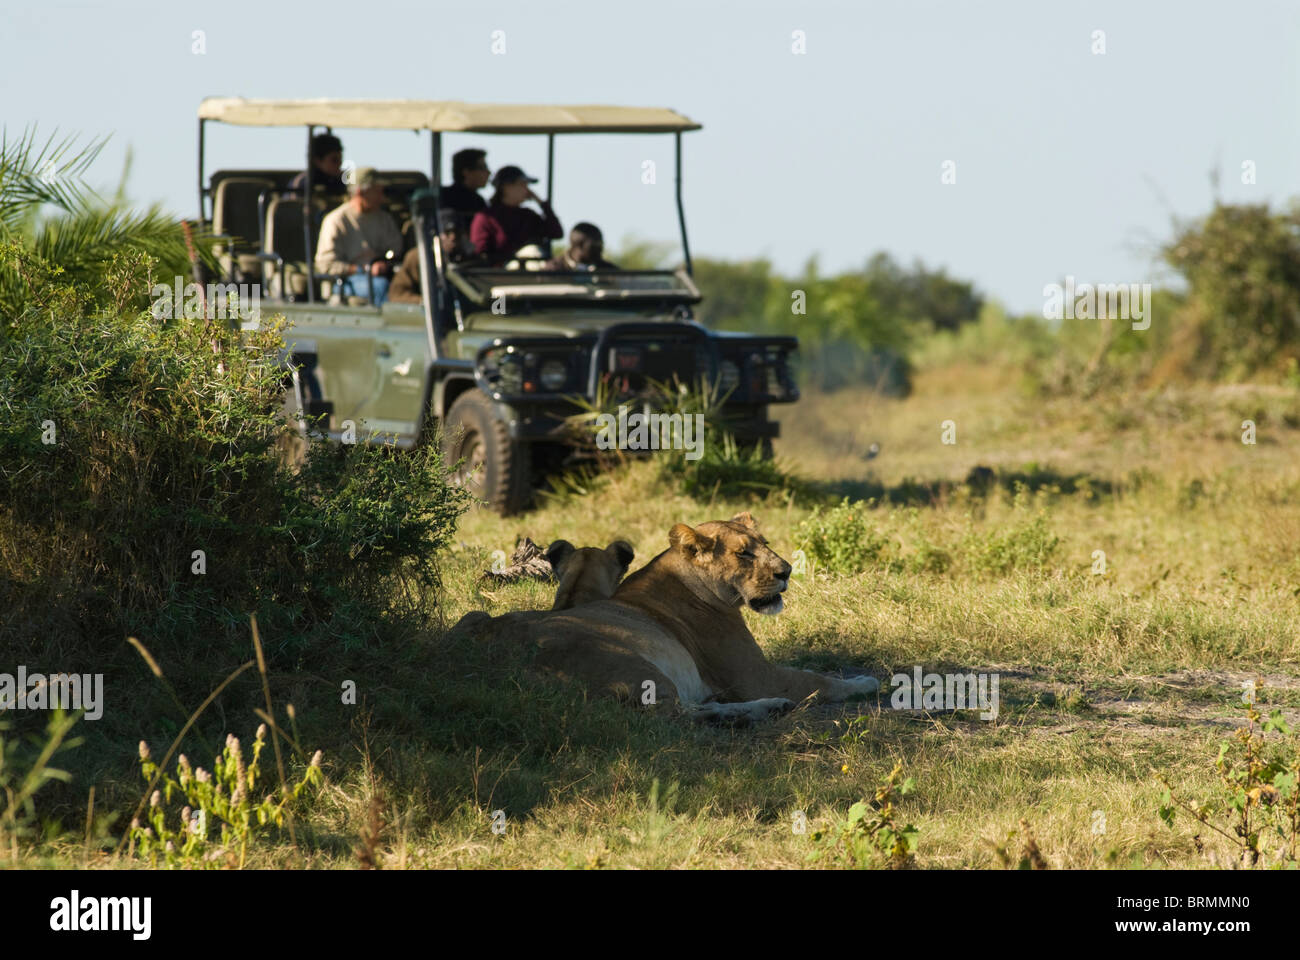 Lioness lying in shade and a safari vehicle with tourists Stock Photo